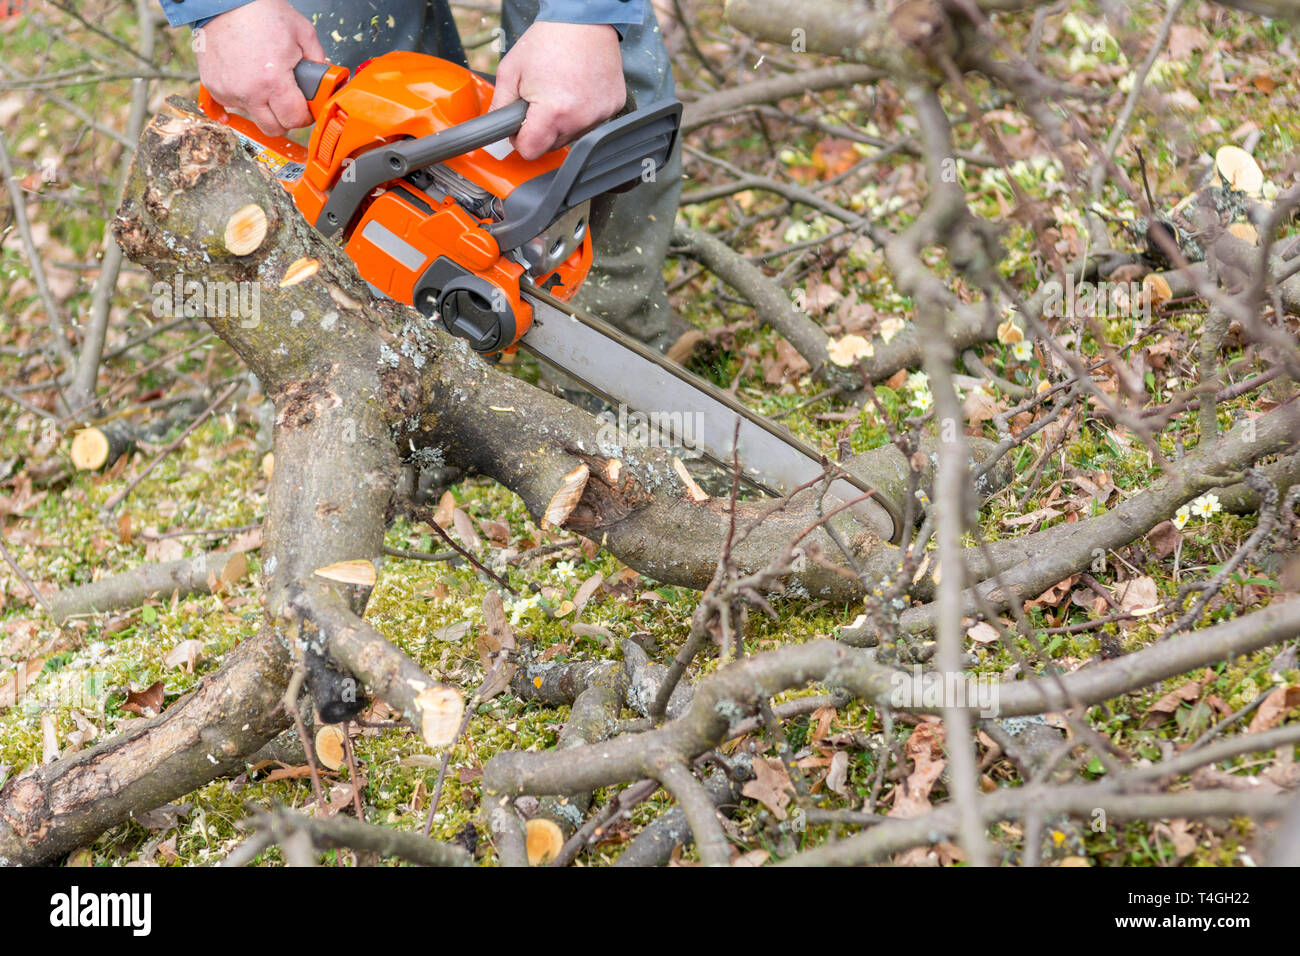 Worker using chain saw and cutting tree branches Stock Photo - Alamy